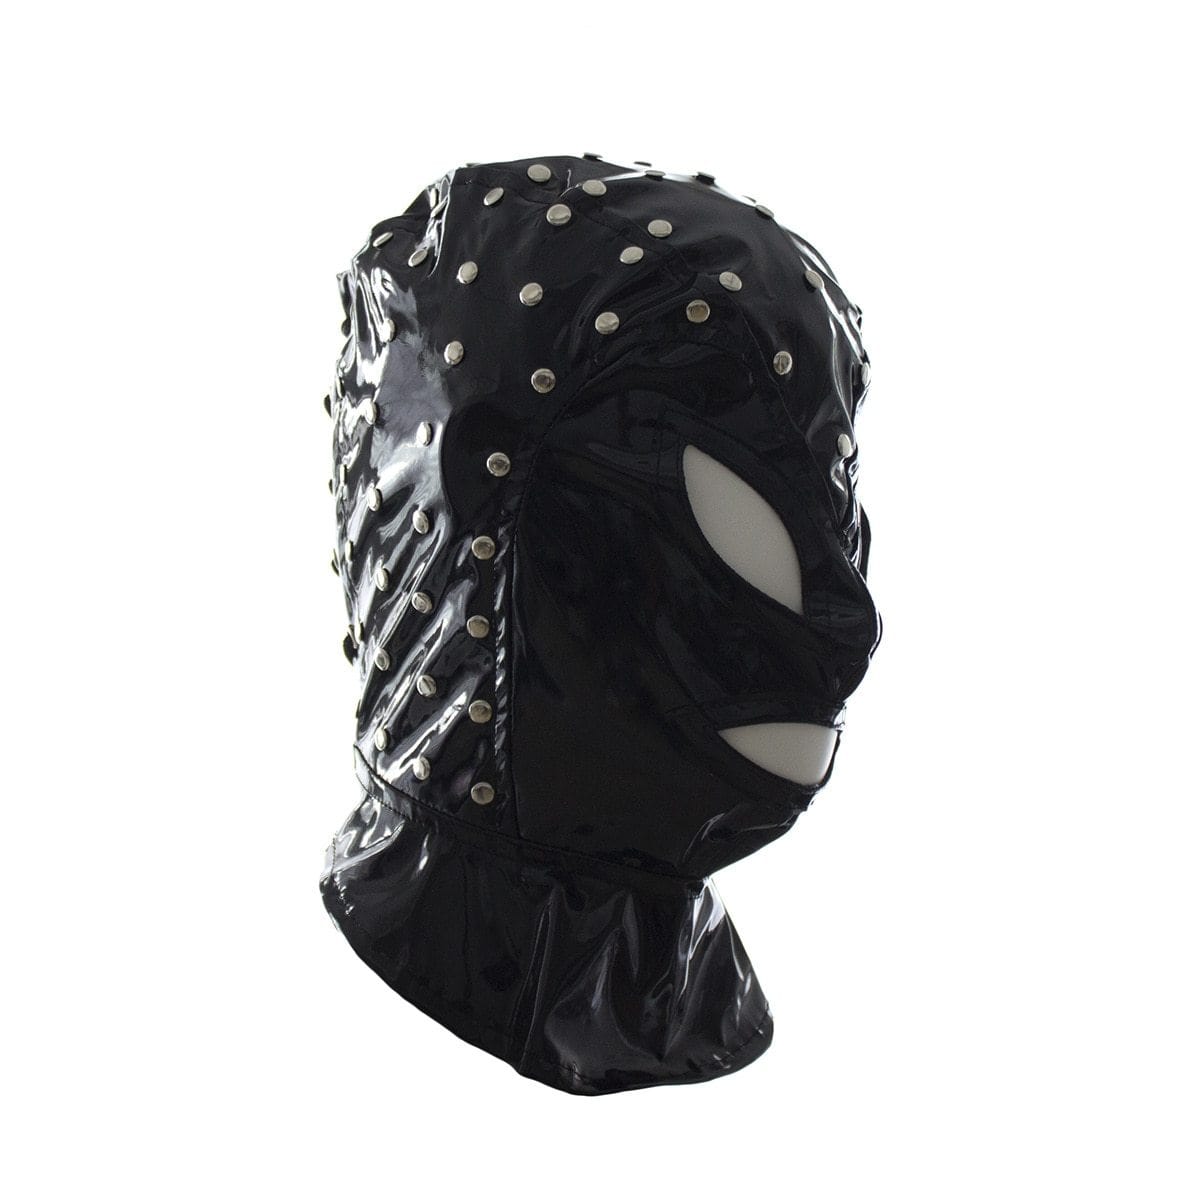 Studded Wet Look Leather Mask